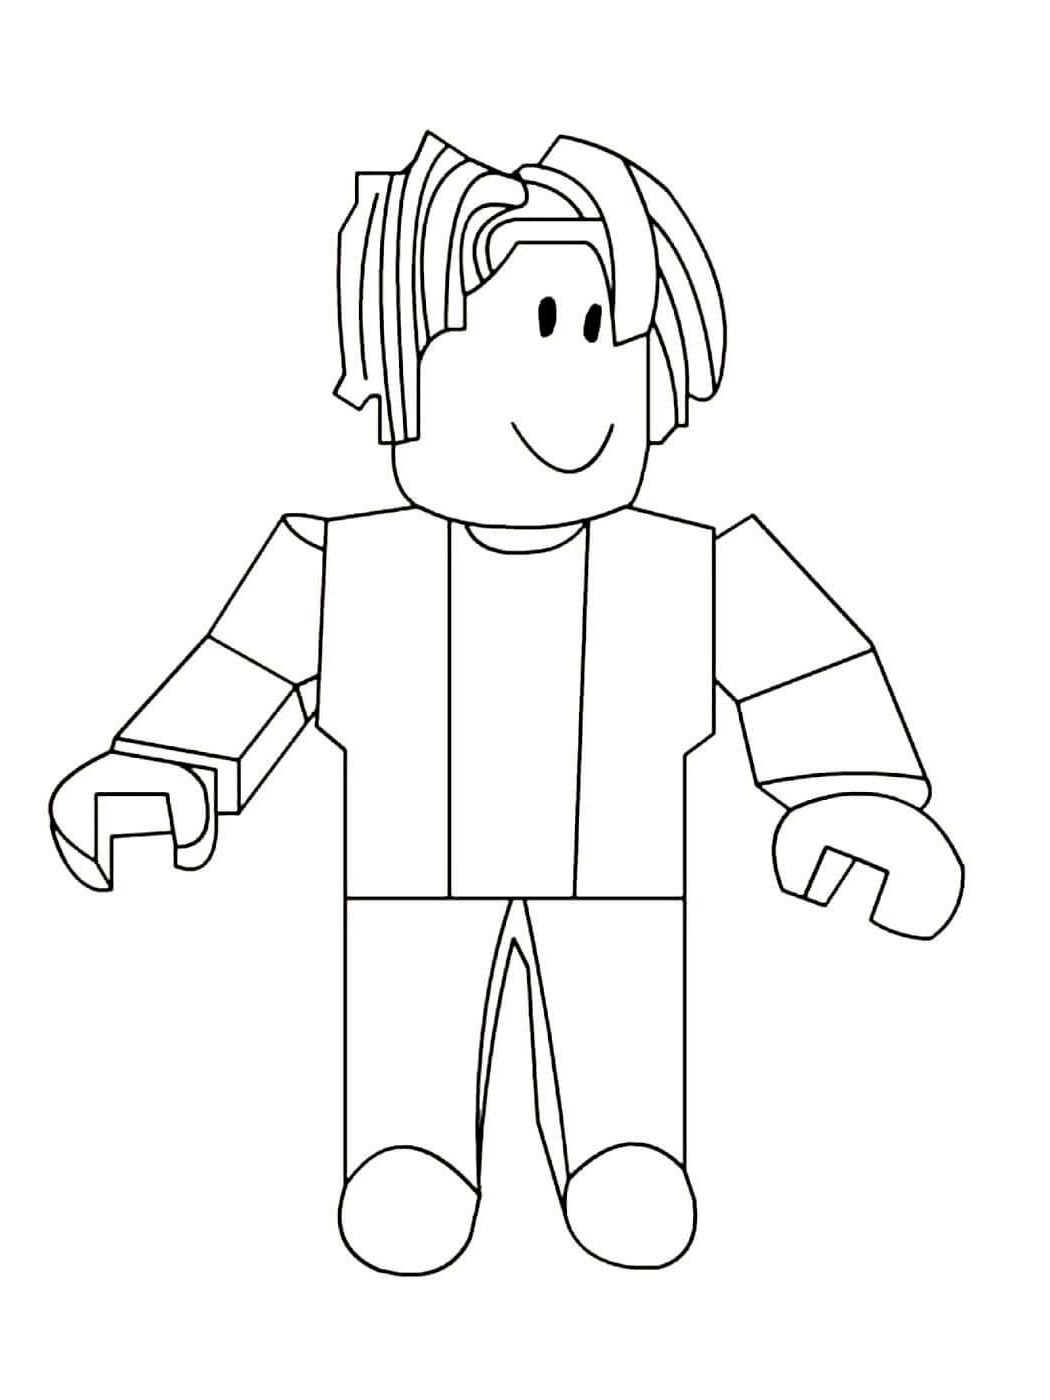 Roblox coloring pages free printable roblox coloring pages coloring pages for boys coloring pages cute doodles drawings